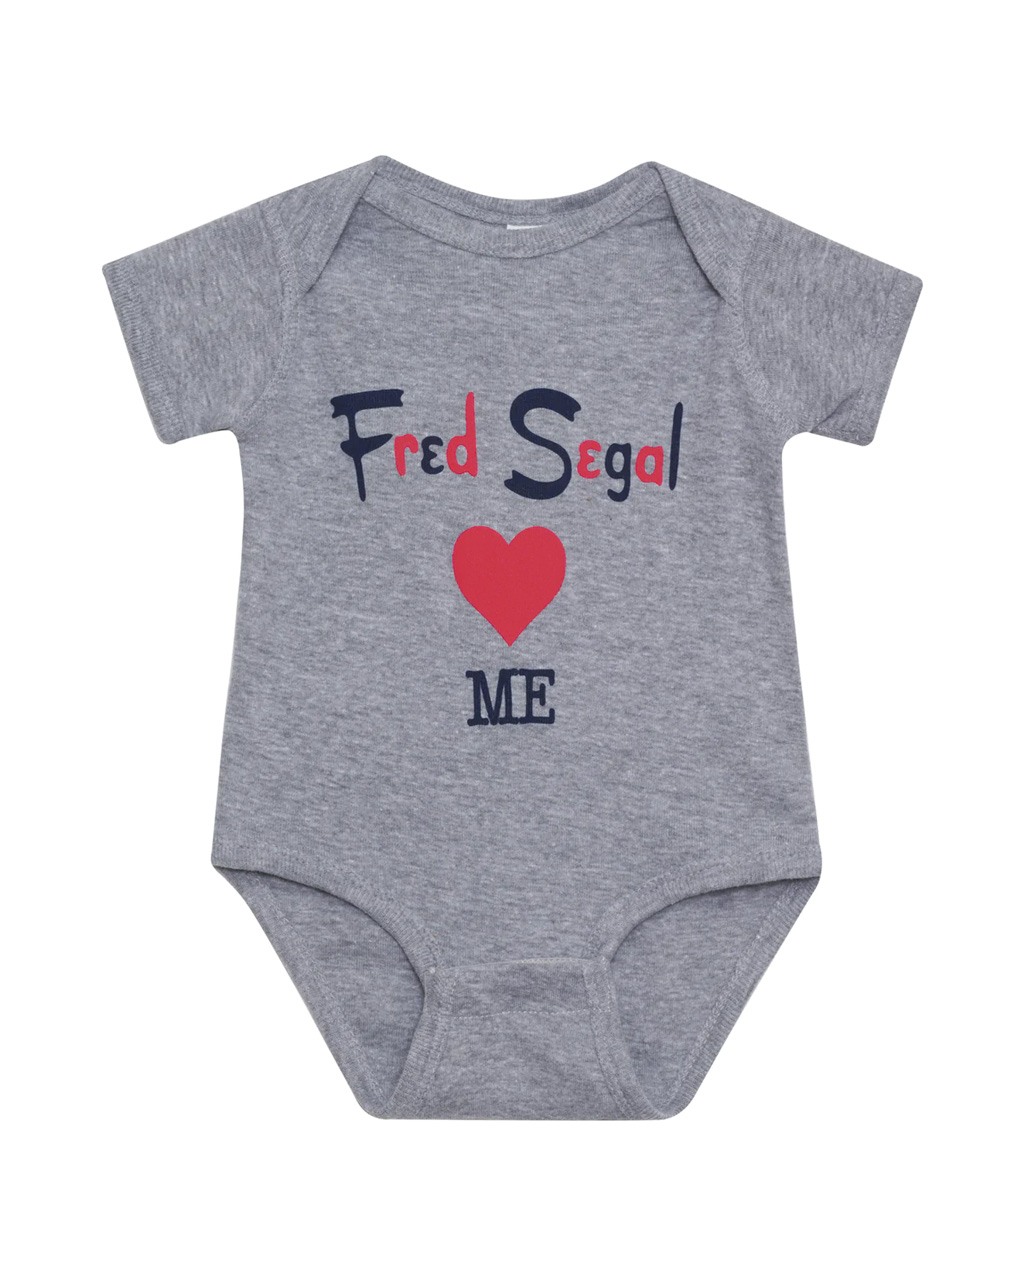 a baby onesie with Fred Segal name on it